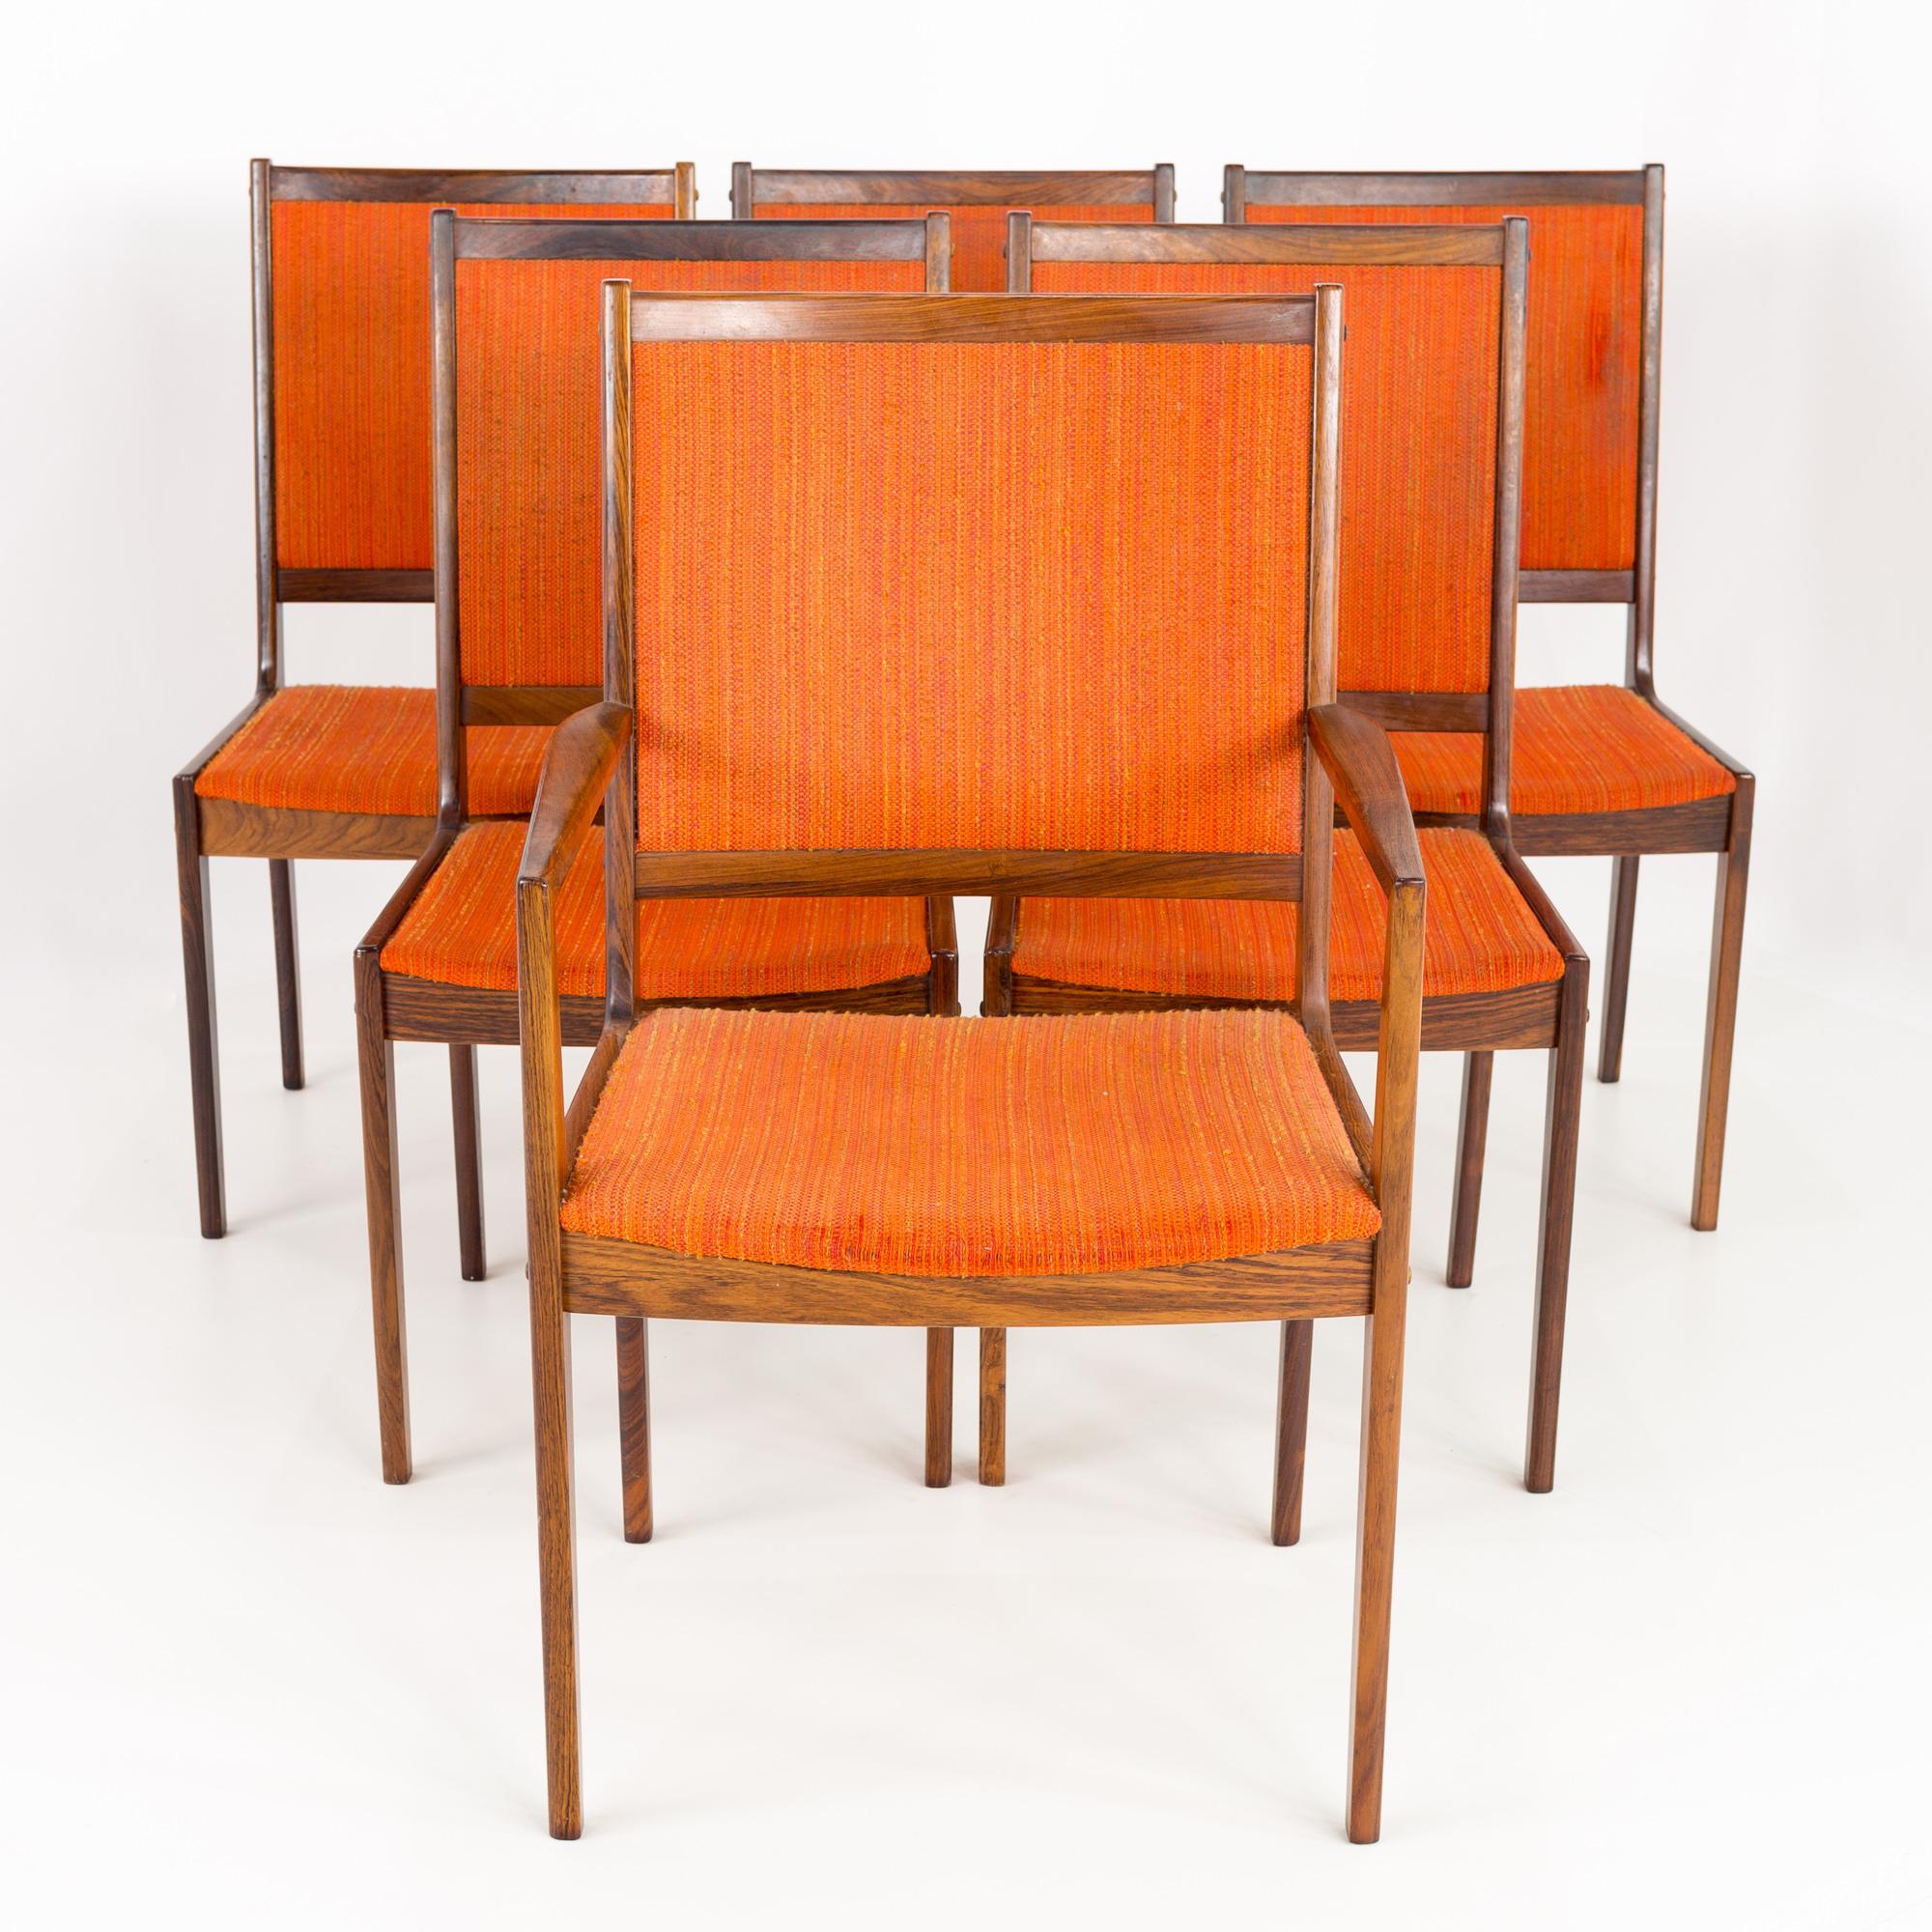 Kofod Larsen mid-century rosewood highback dining chairs - set of 6.

Each chair measures: 23.75 wide x 21.75 deep x 37.5 high, with a seat height of 17.75 and arm height of 25.75 inches.

All pieces of furniture can be had in what we call